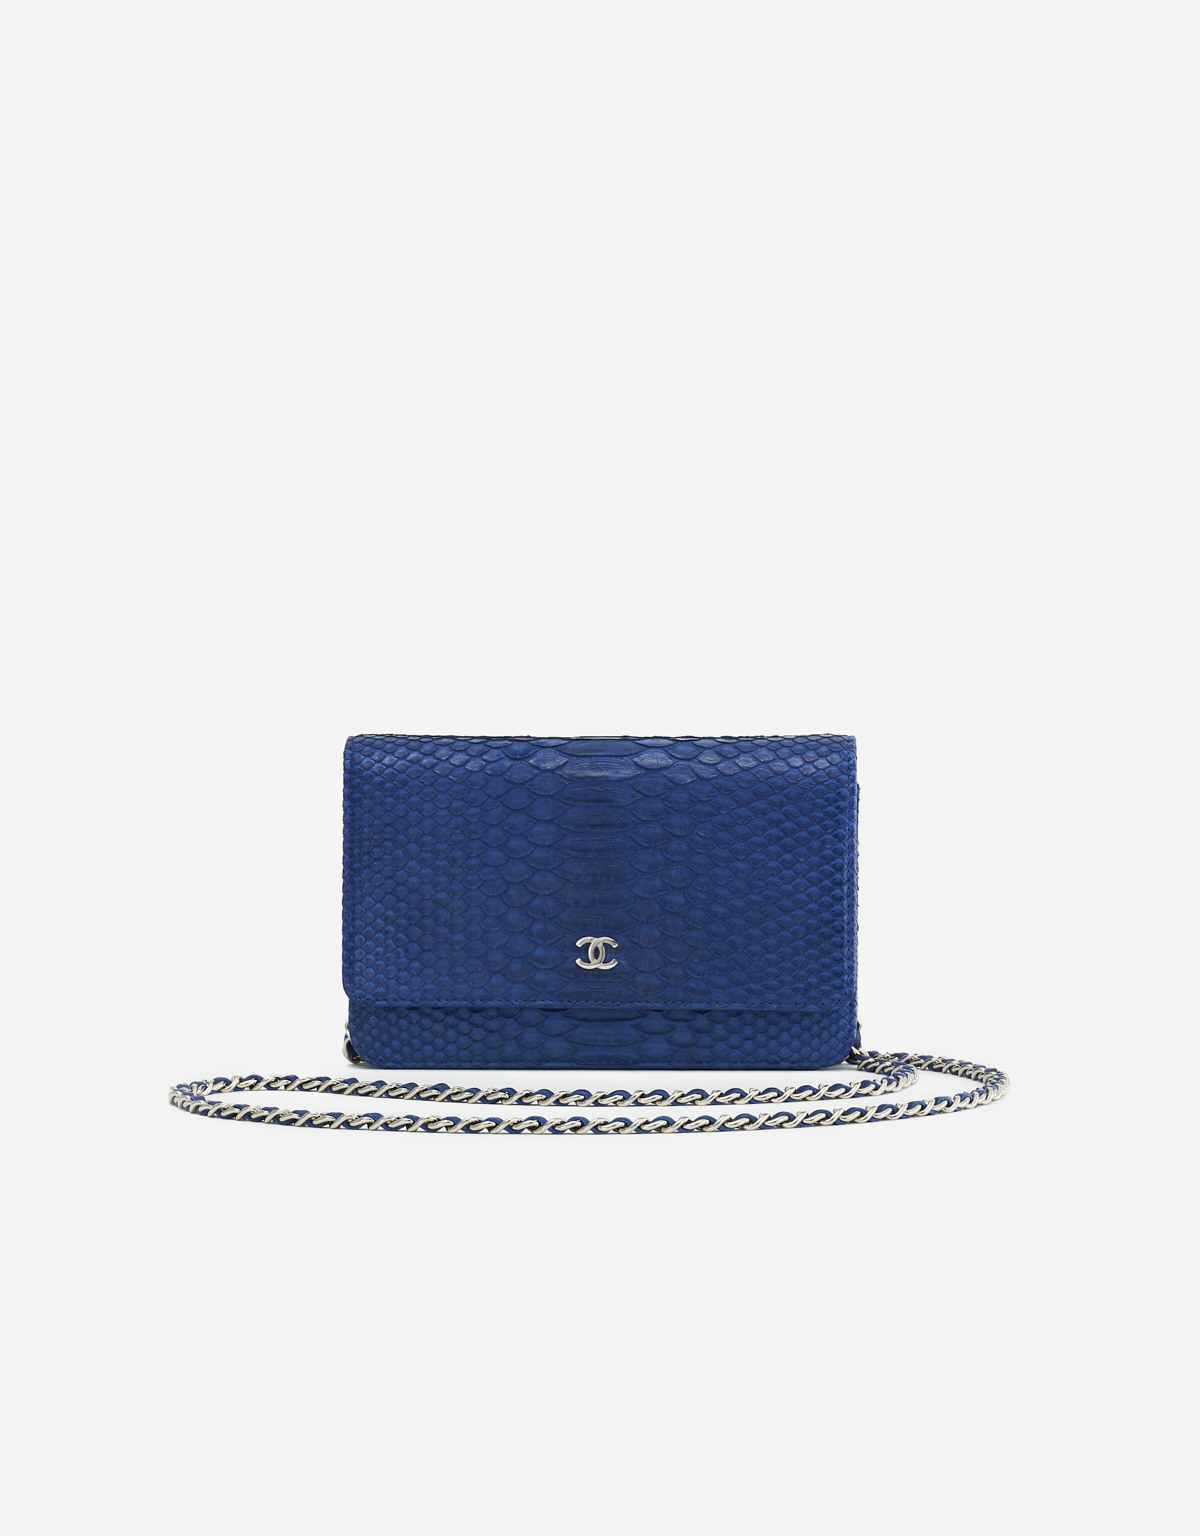 Chanel Wallet On Chain Python Blue